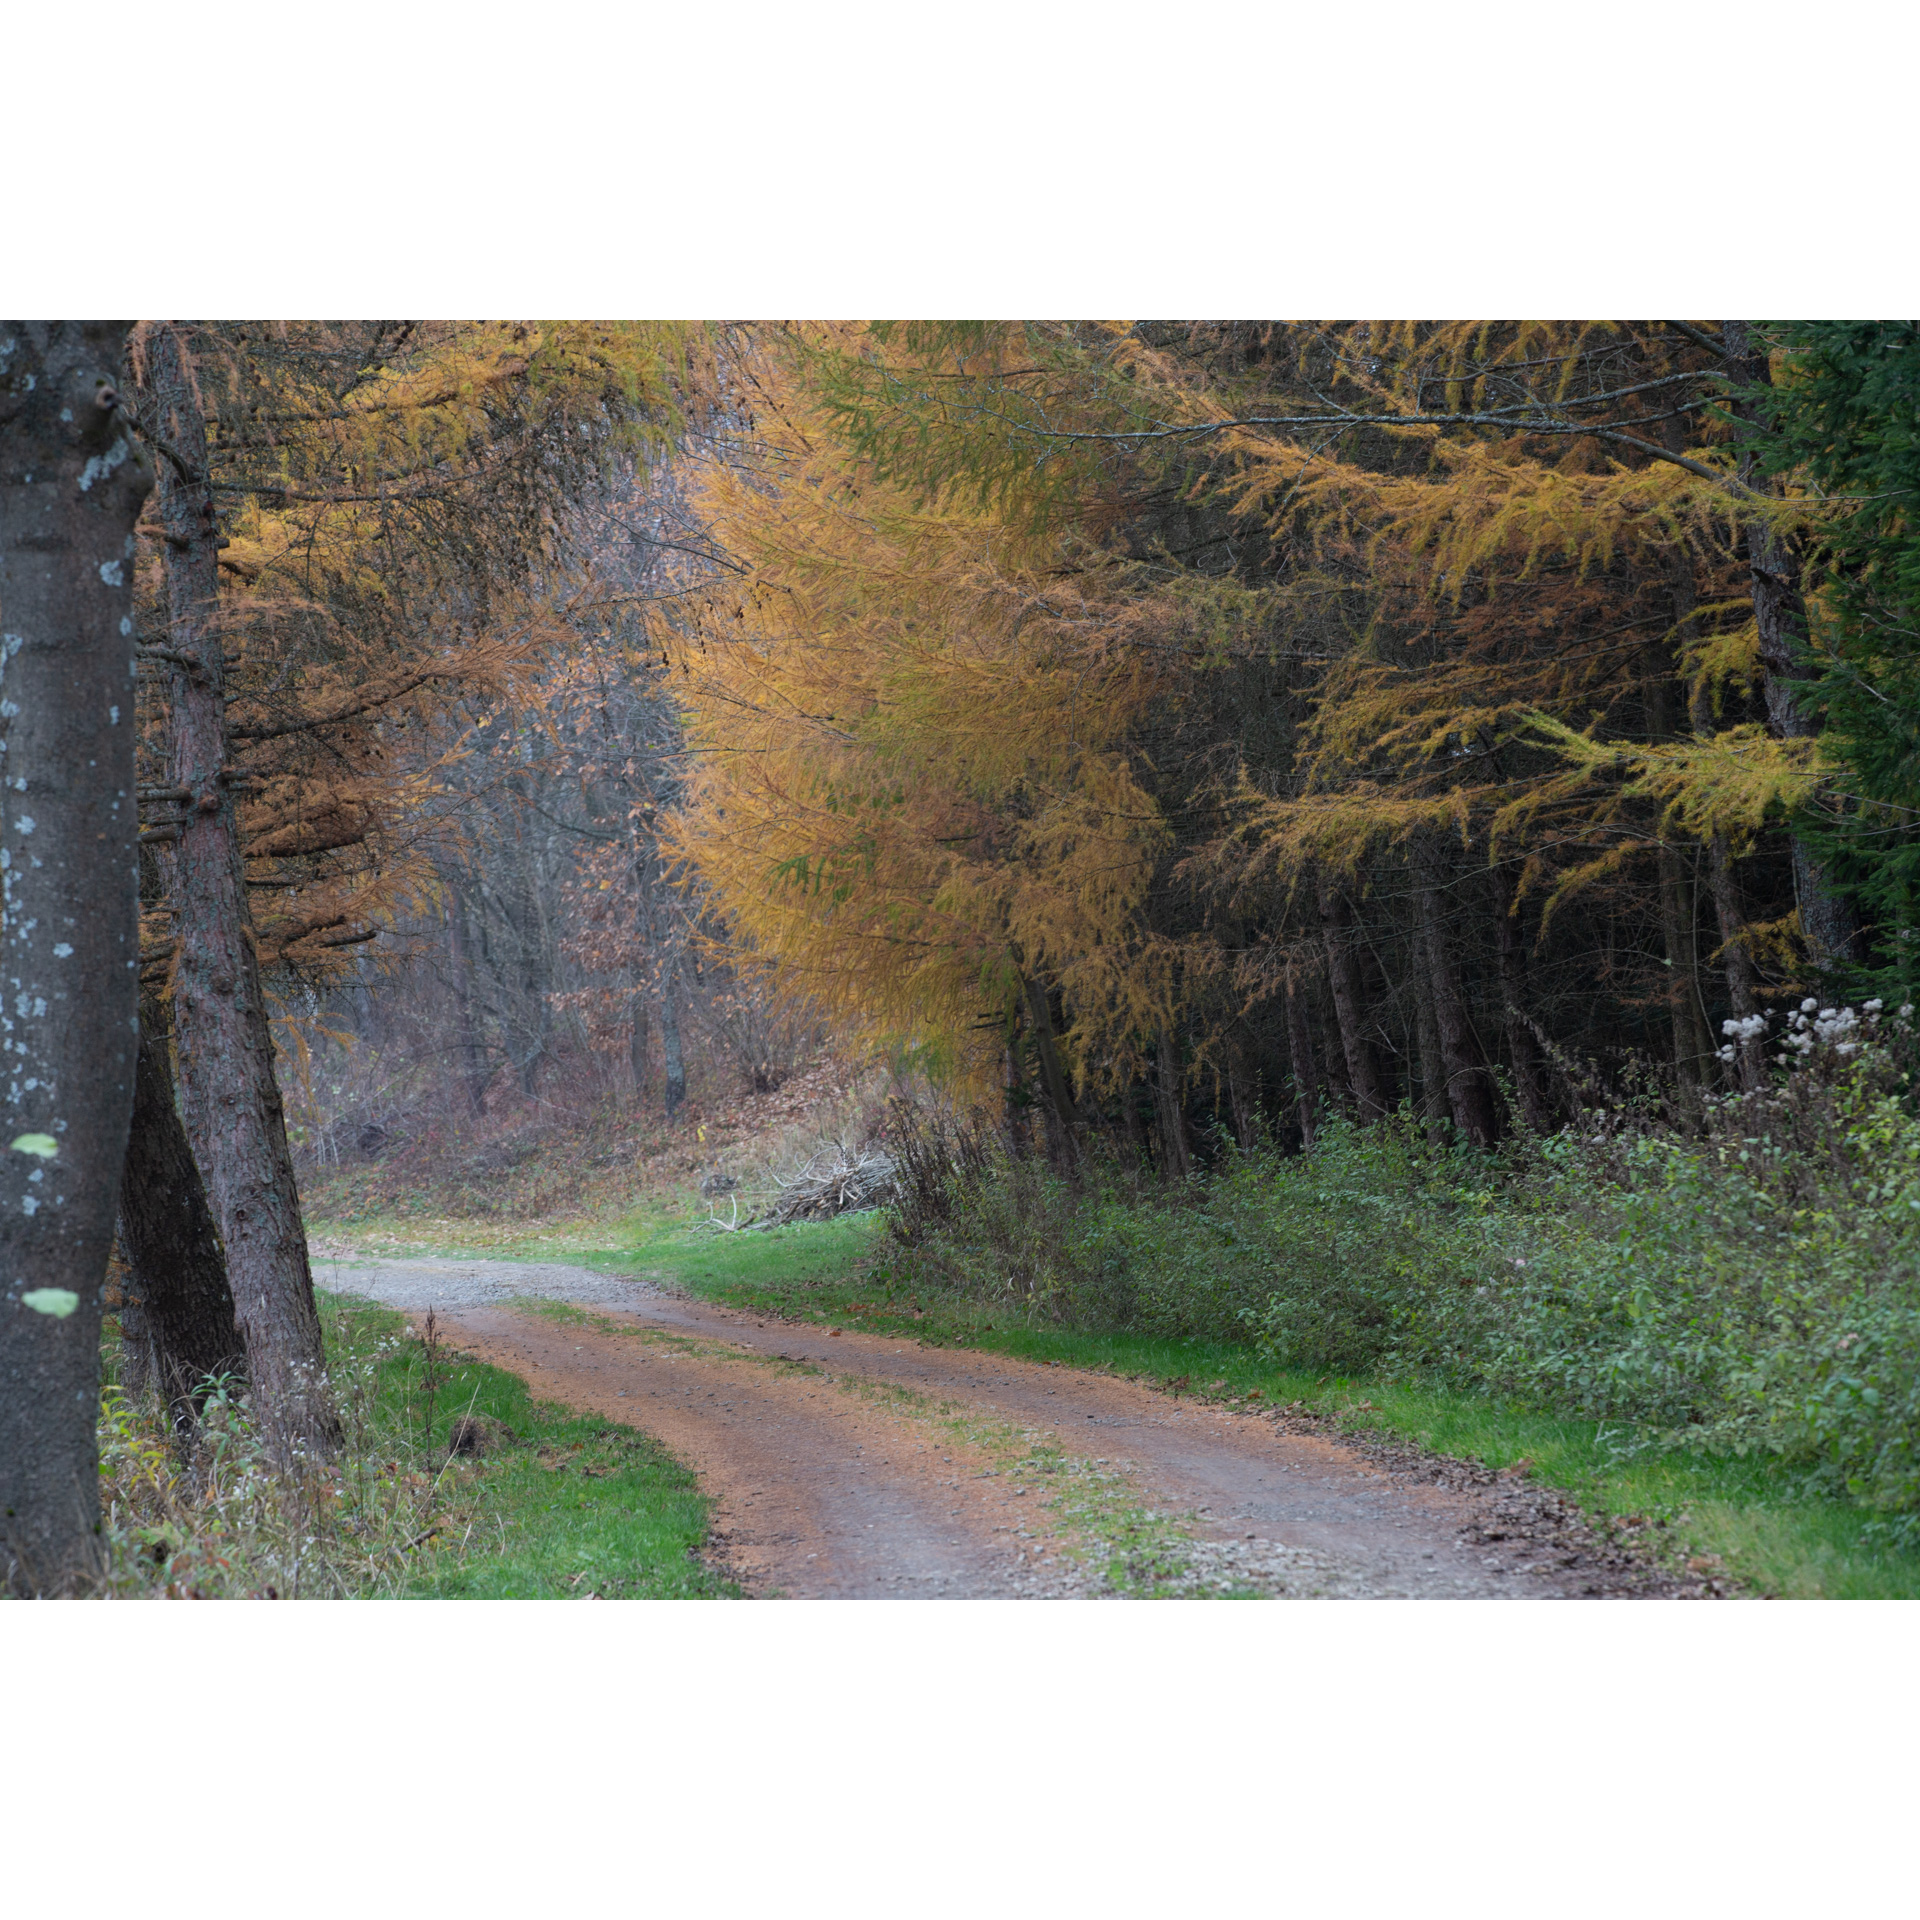 Forest sandy road running between yellowed coniferous trees and green bushes